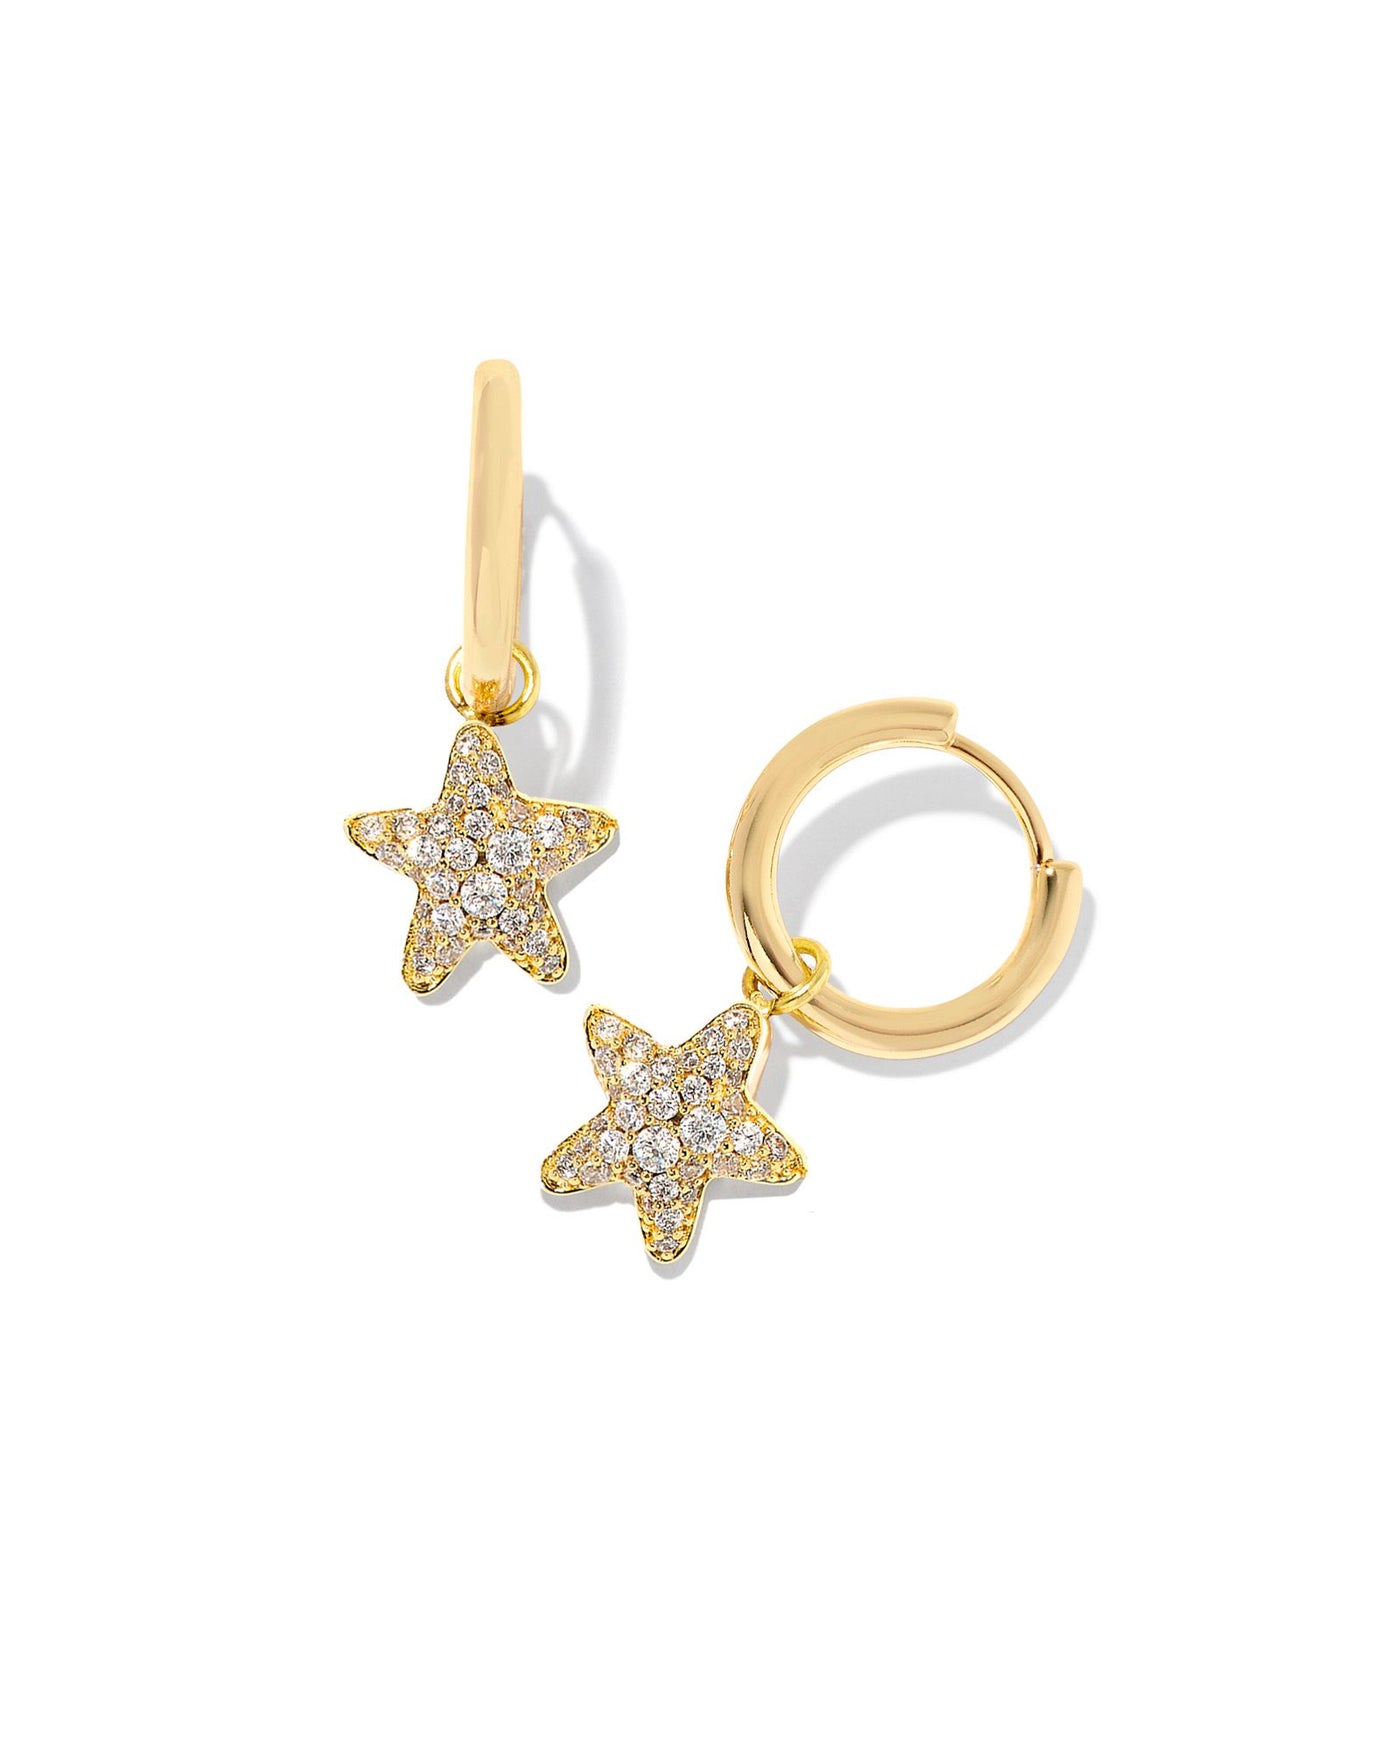 Kendra Scott Jae Star Pave Huggies in Gold White Crystal on white background.